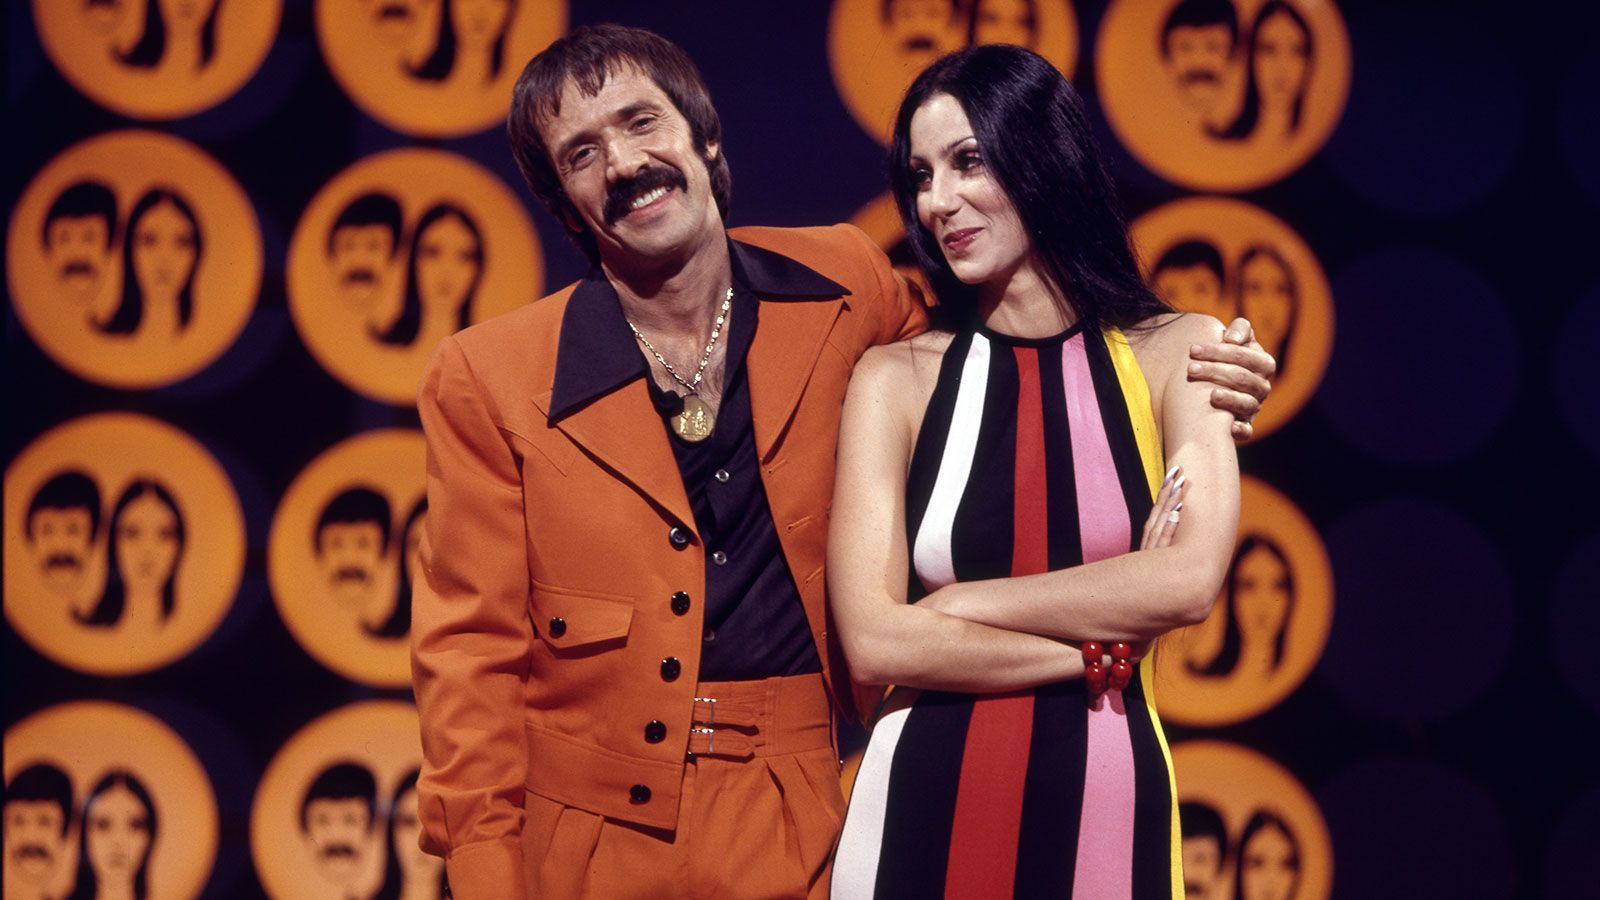 Show The Sonny & Cher Comedy Hour